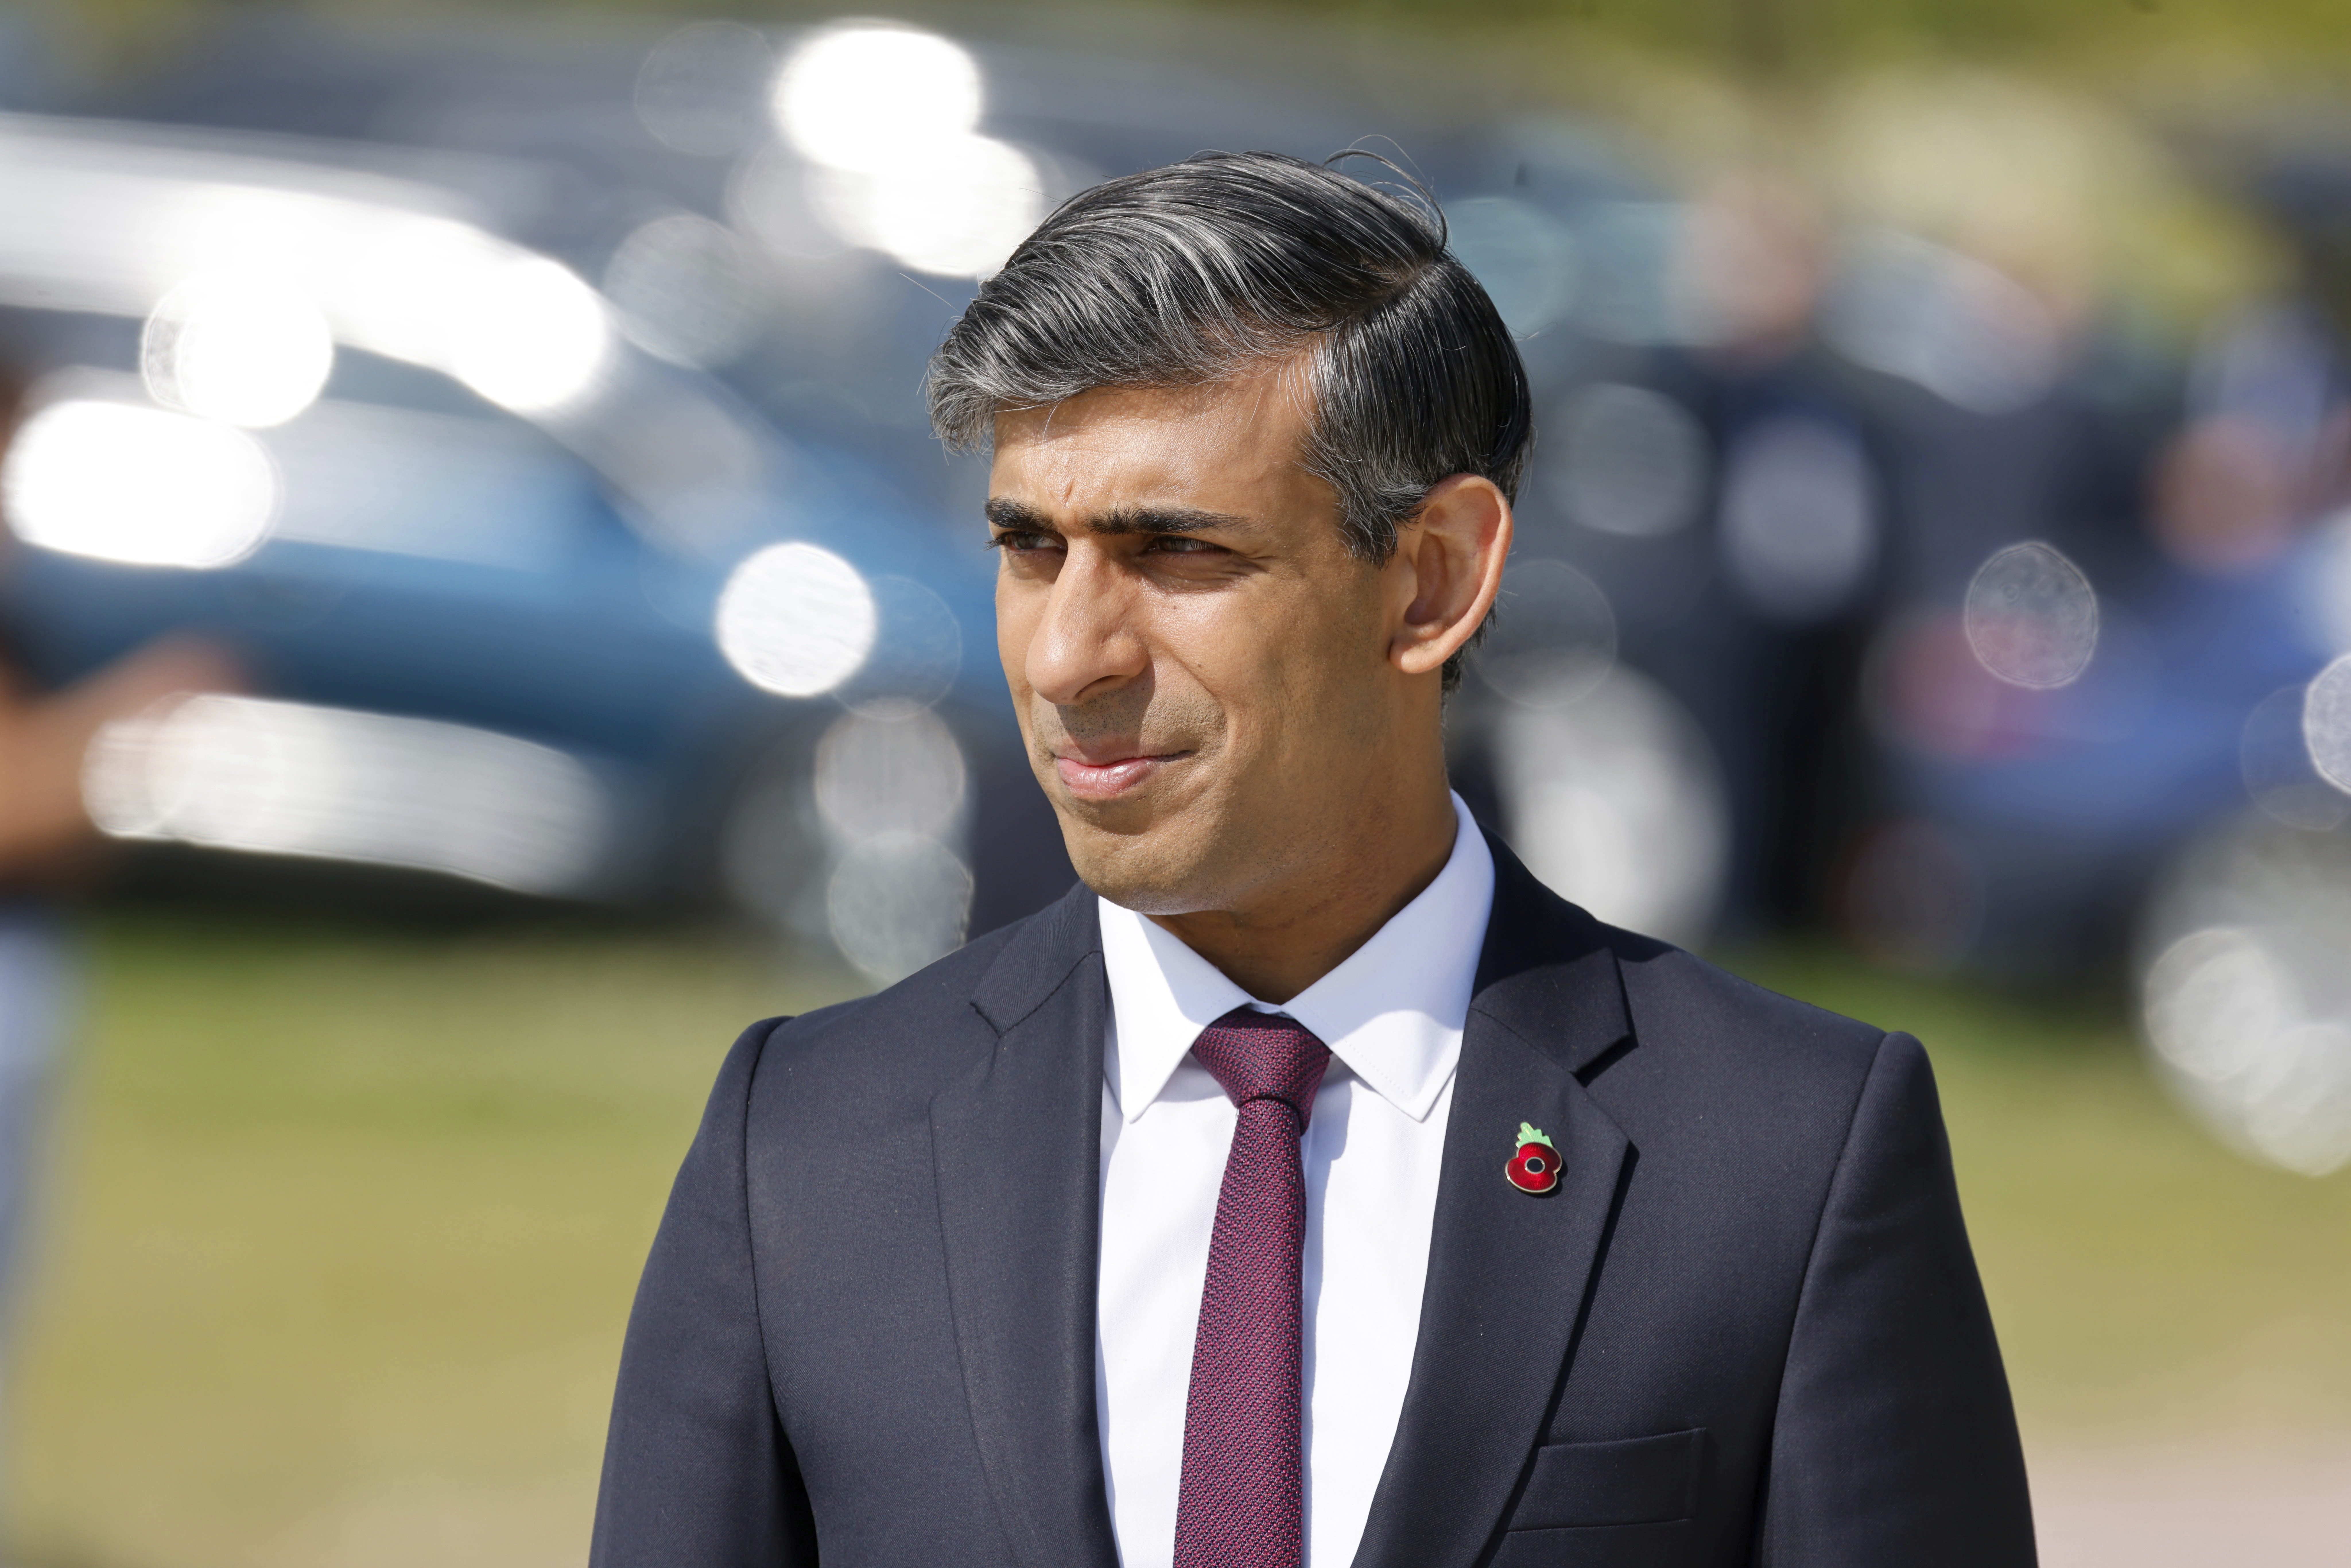 Rishi Sunak apologizes for skipping a D-Day ceremony to return to the election campaign trail